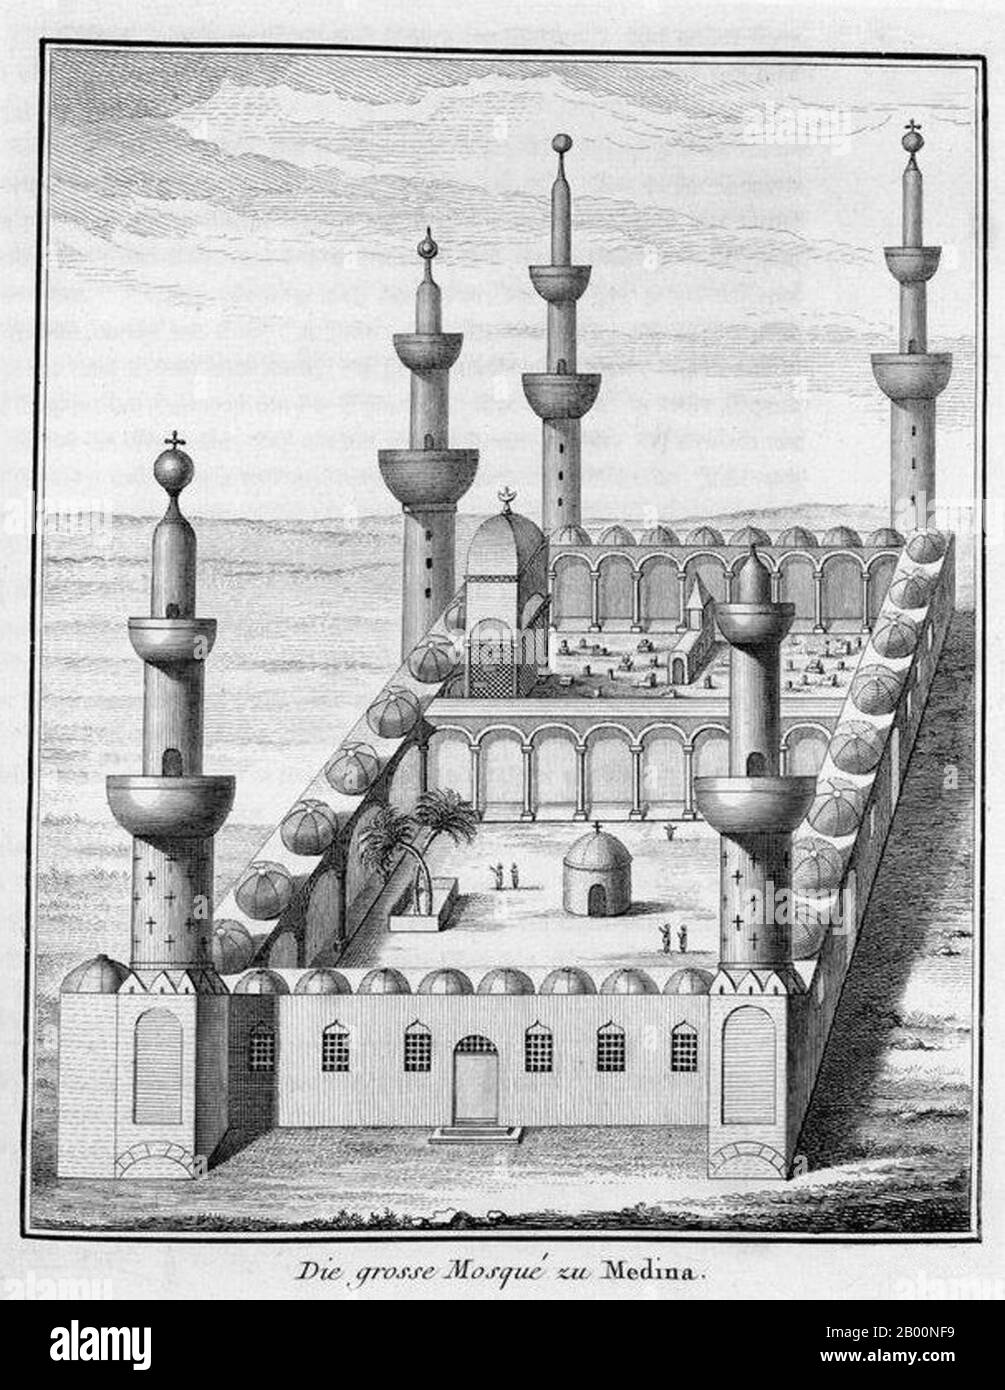 Yemen: 'The Great Mosque of Medina'. Carsten Niebuhr (1733-1815), Royal Danish Arabia Expedition (1761-1776).  The 6 year expedition to Egypt and Yemen funded by the King of Denmark in 1761 was the stuff of romantic legend. Filled with death, womanising and general intrigue, Carsten Niebuhr - the only survivor - recorded a dispassionate account of the journey in 'Beschreibung von Arabien' in 1772 - an historical classic in terms of informing Europe about the Middle East. Stock Photo